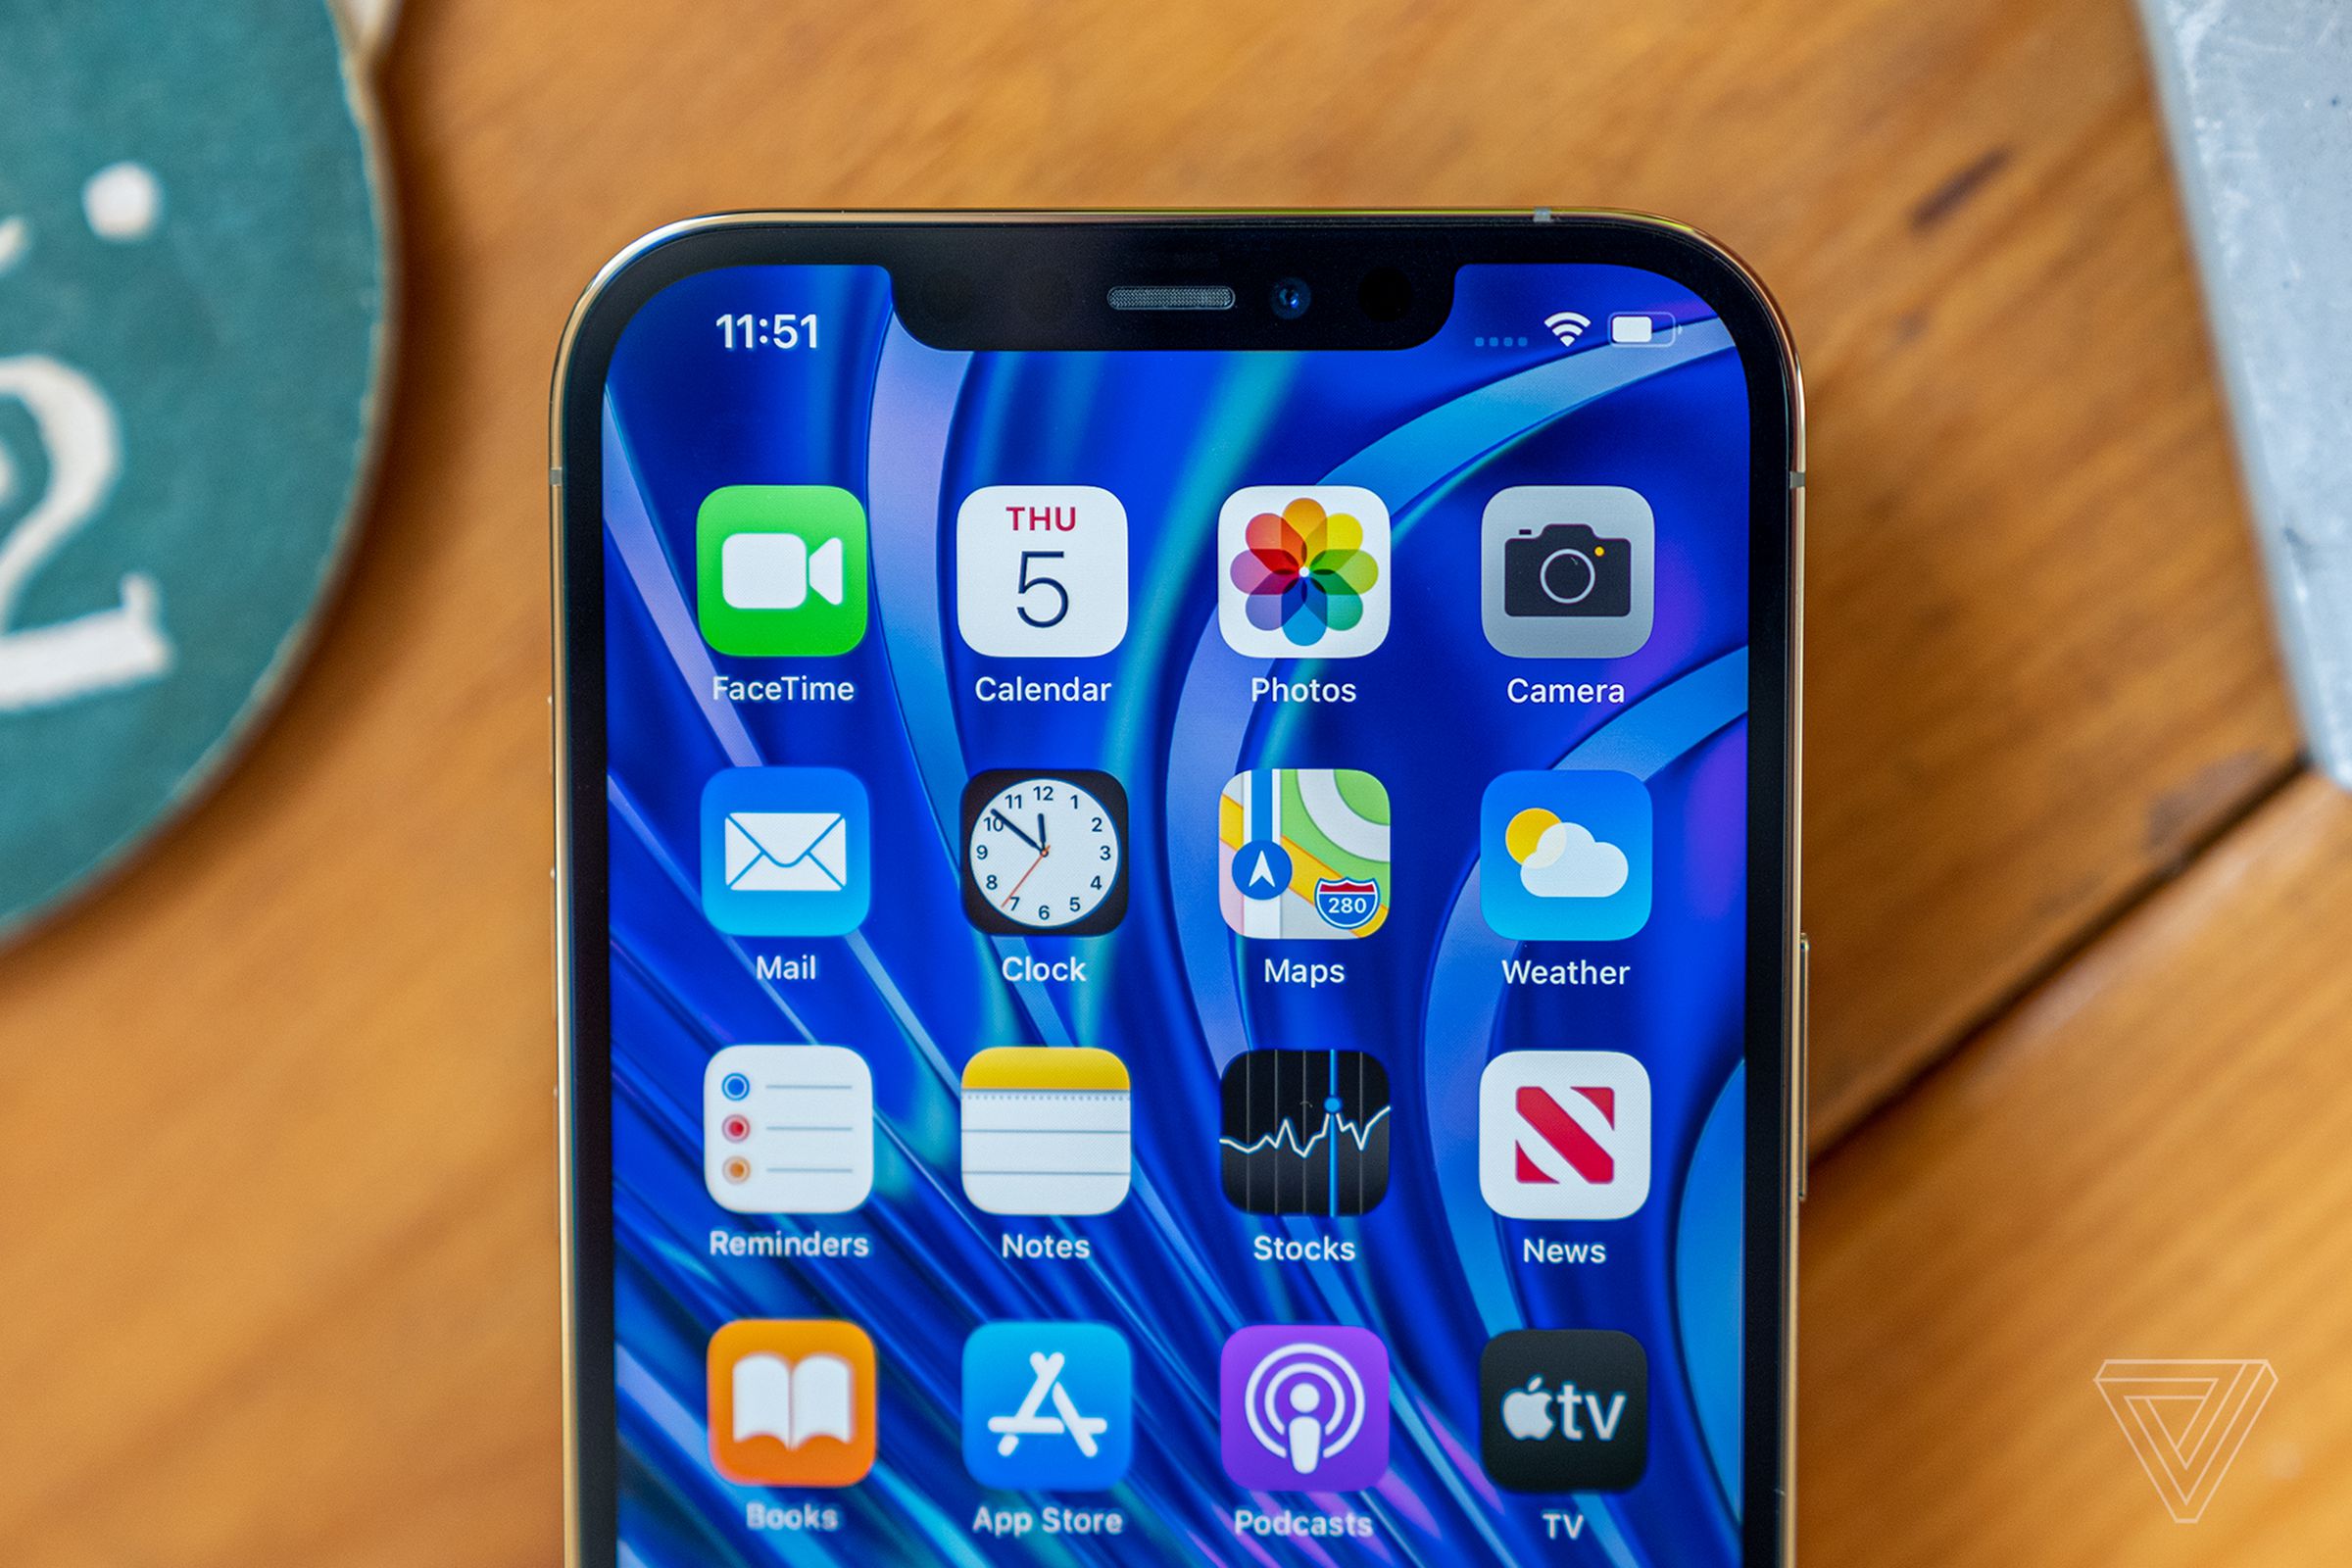 The 6.7-inch OLED screen is the largest ever for an iPhone.